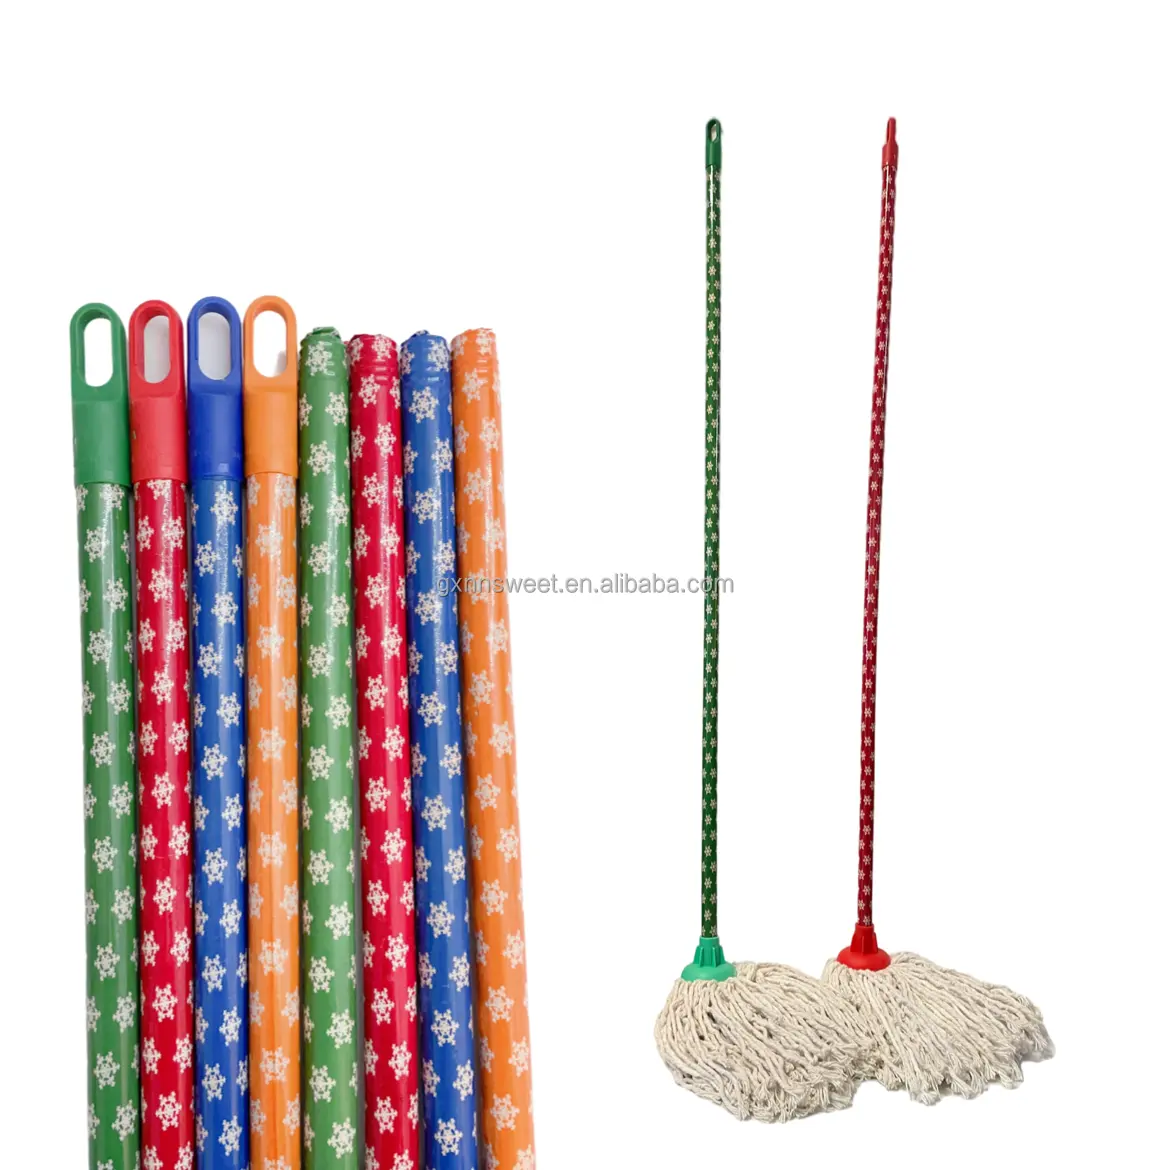 Household cleaning products High quality floor cleaning mop head